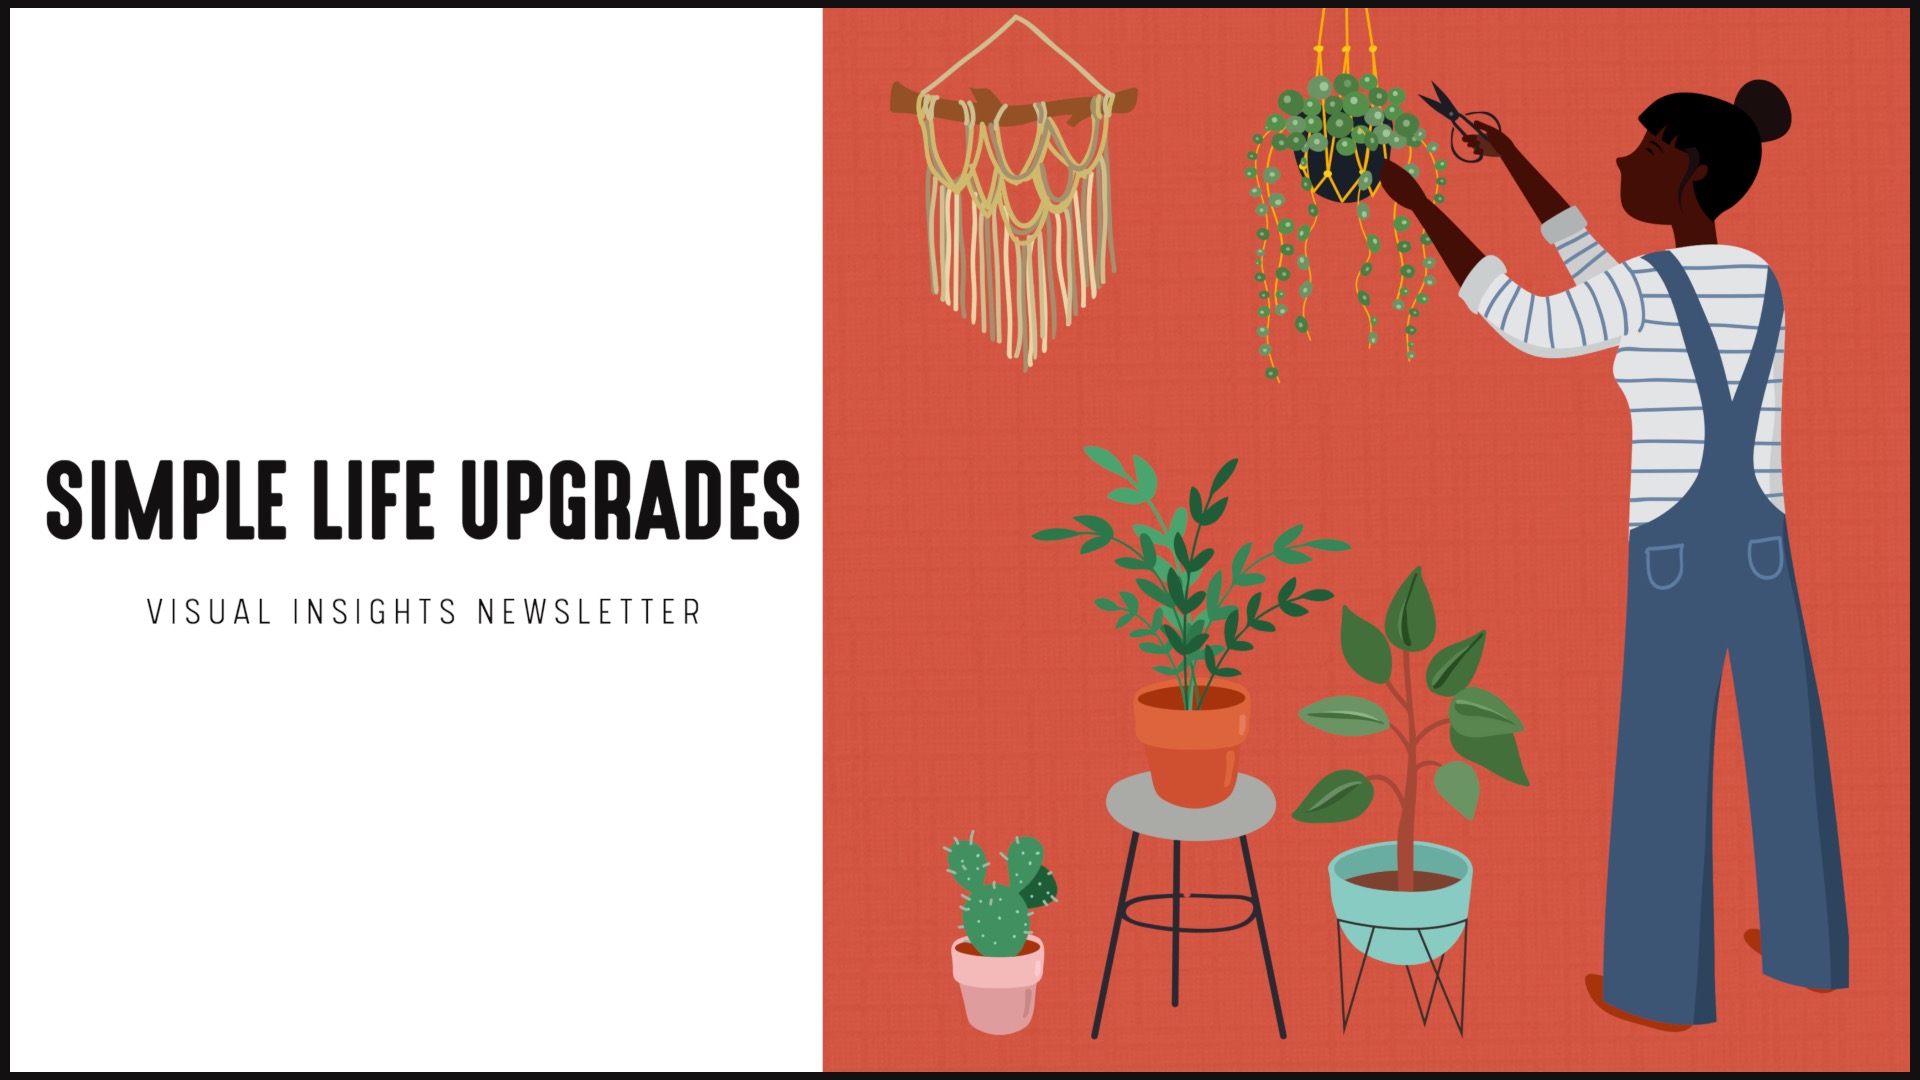 [NEW] Visual Insights Newsletter | Simple Life Upgrades